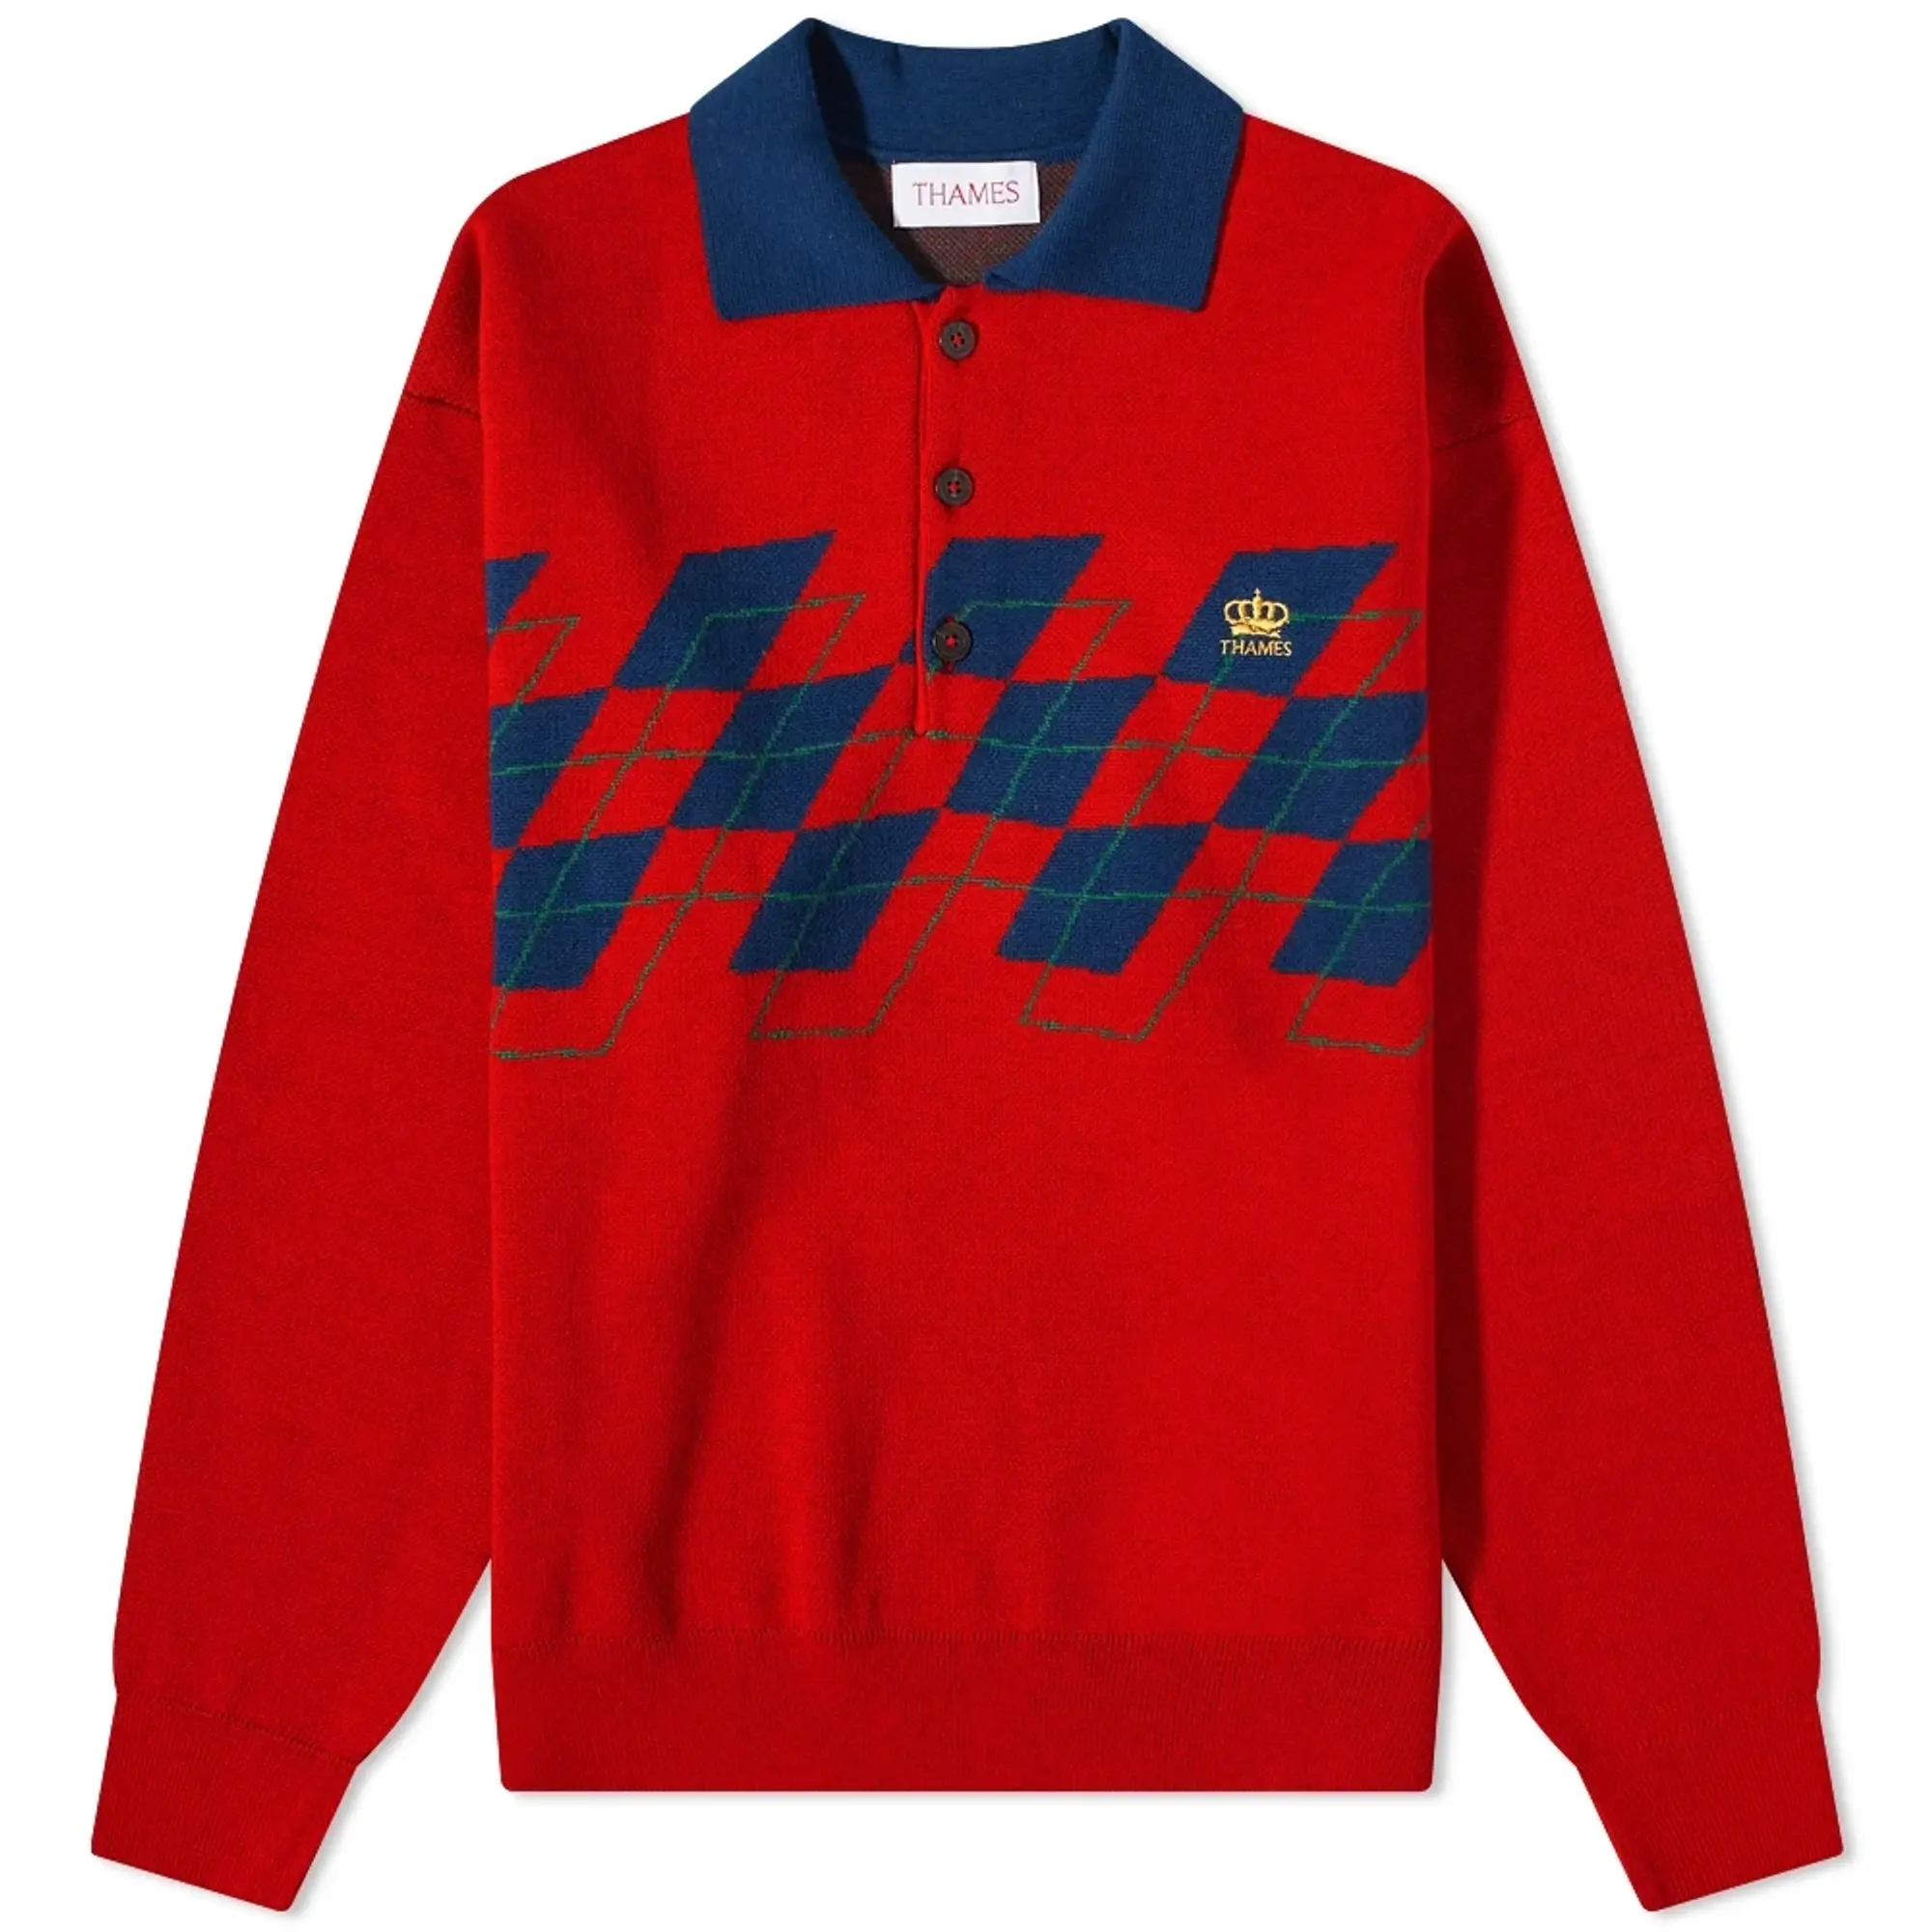 Thames Long Sleeve Aviemore Knit Polo Red